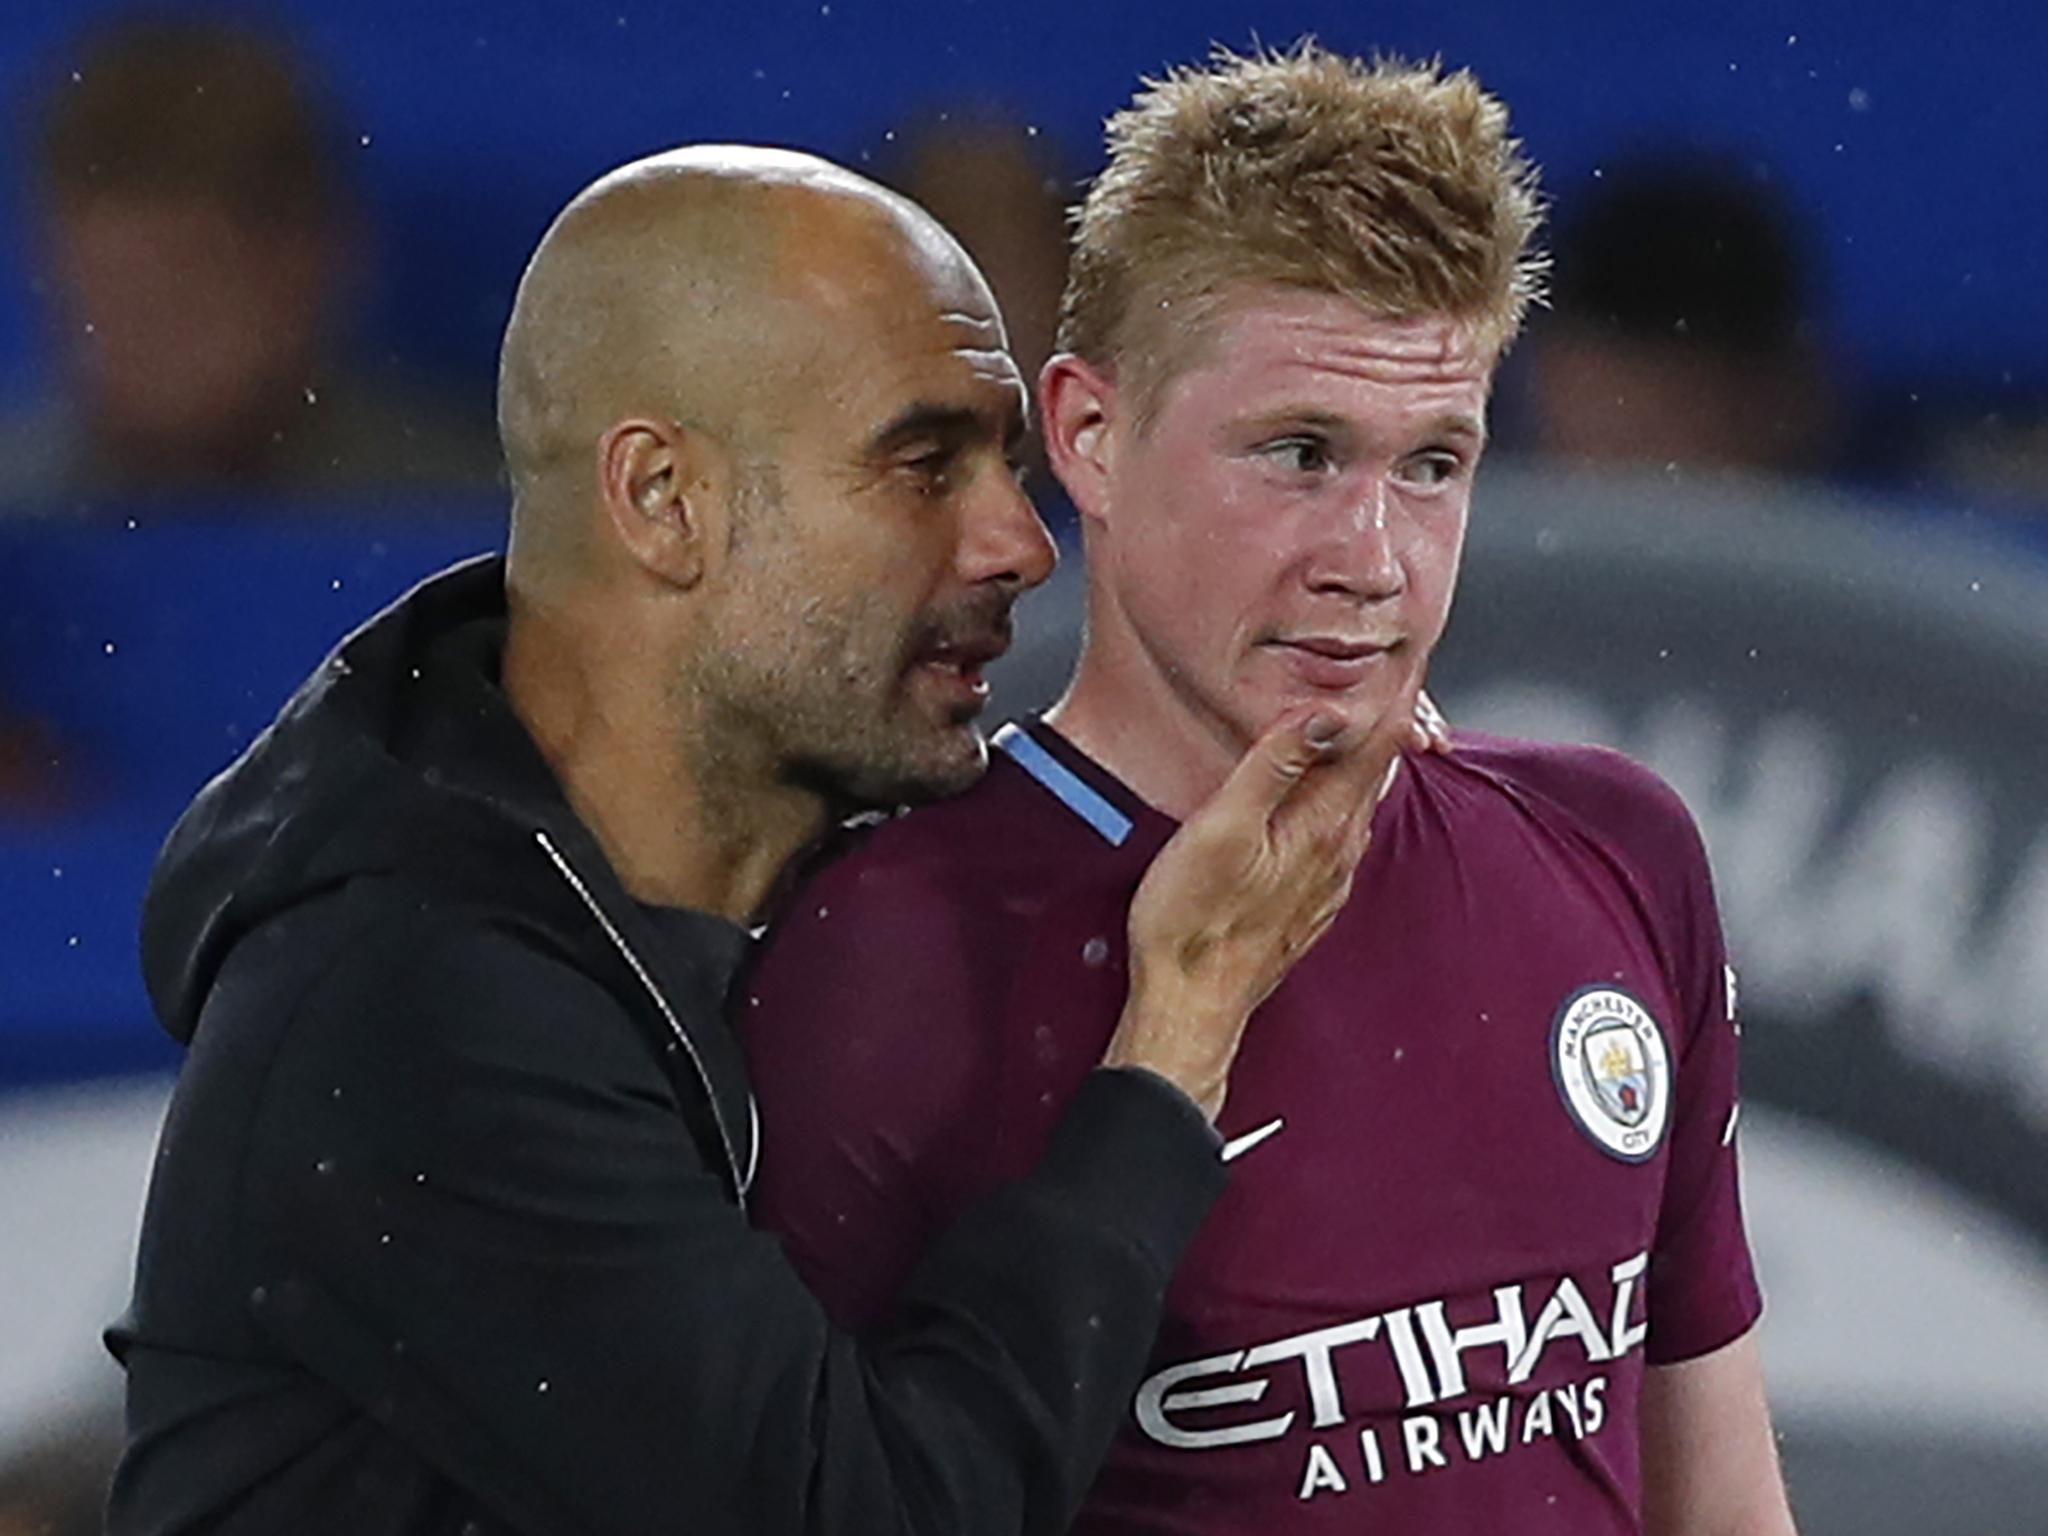 Pep Guardiola was delighted with Kevin De Bruyne's display against Chelsea as Manchester City clinched a 1-0 win